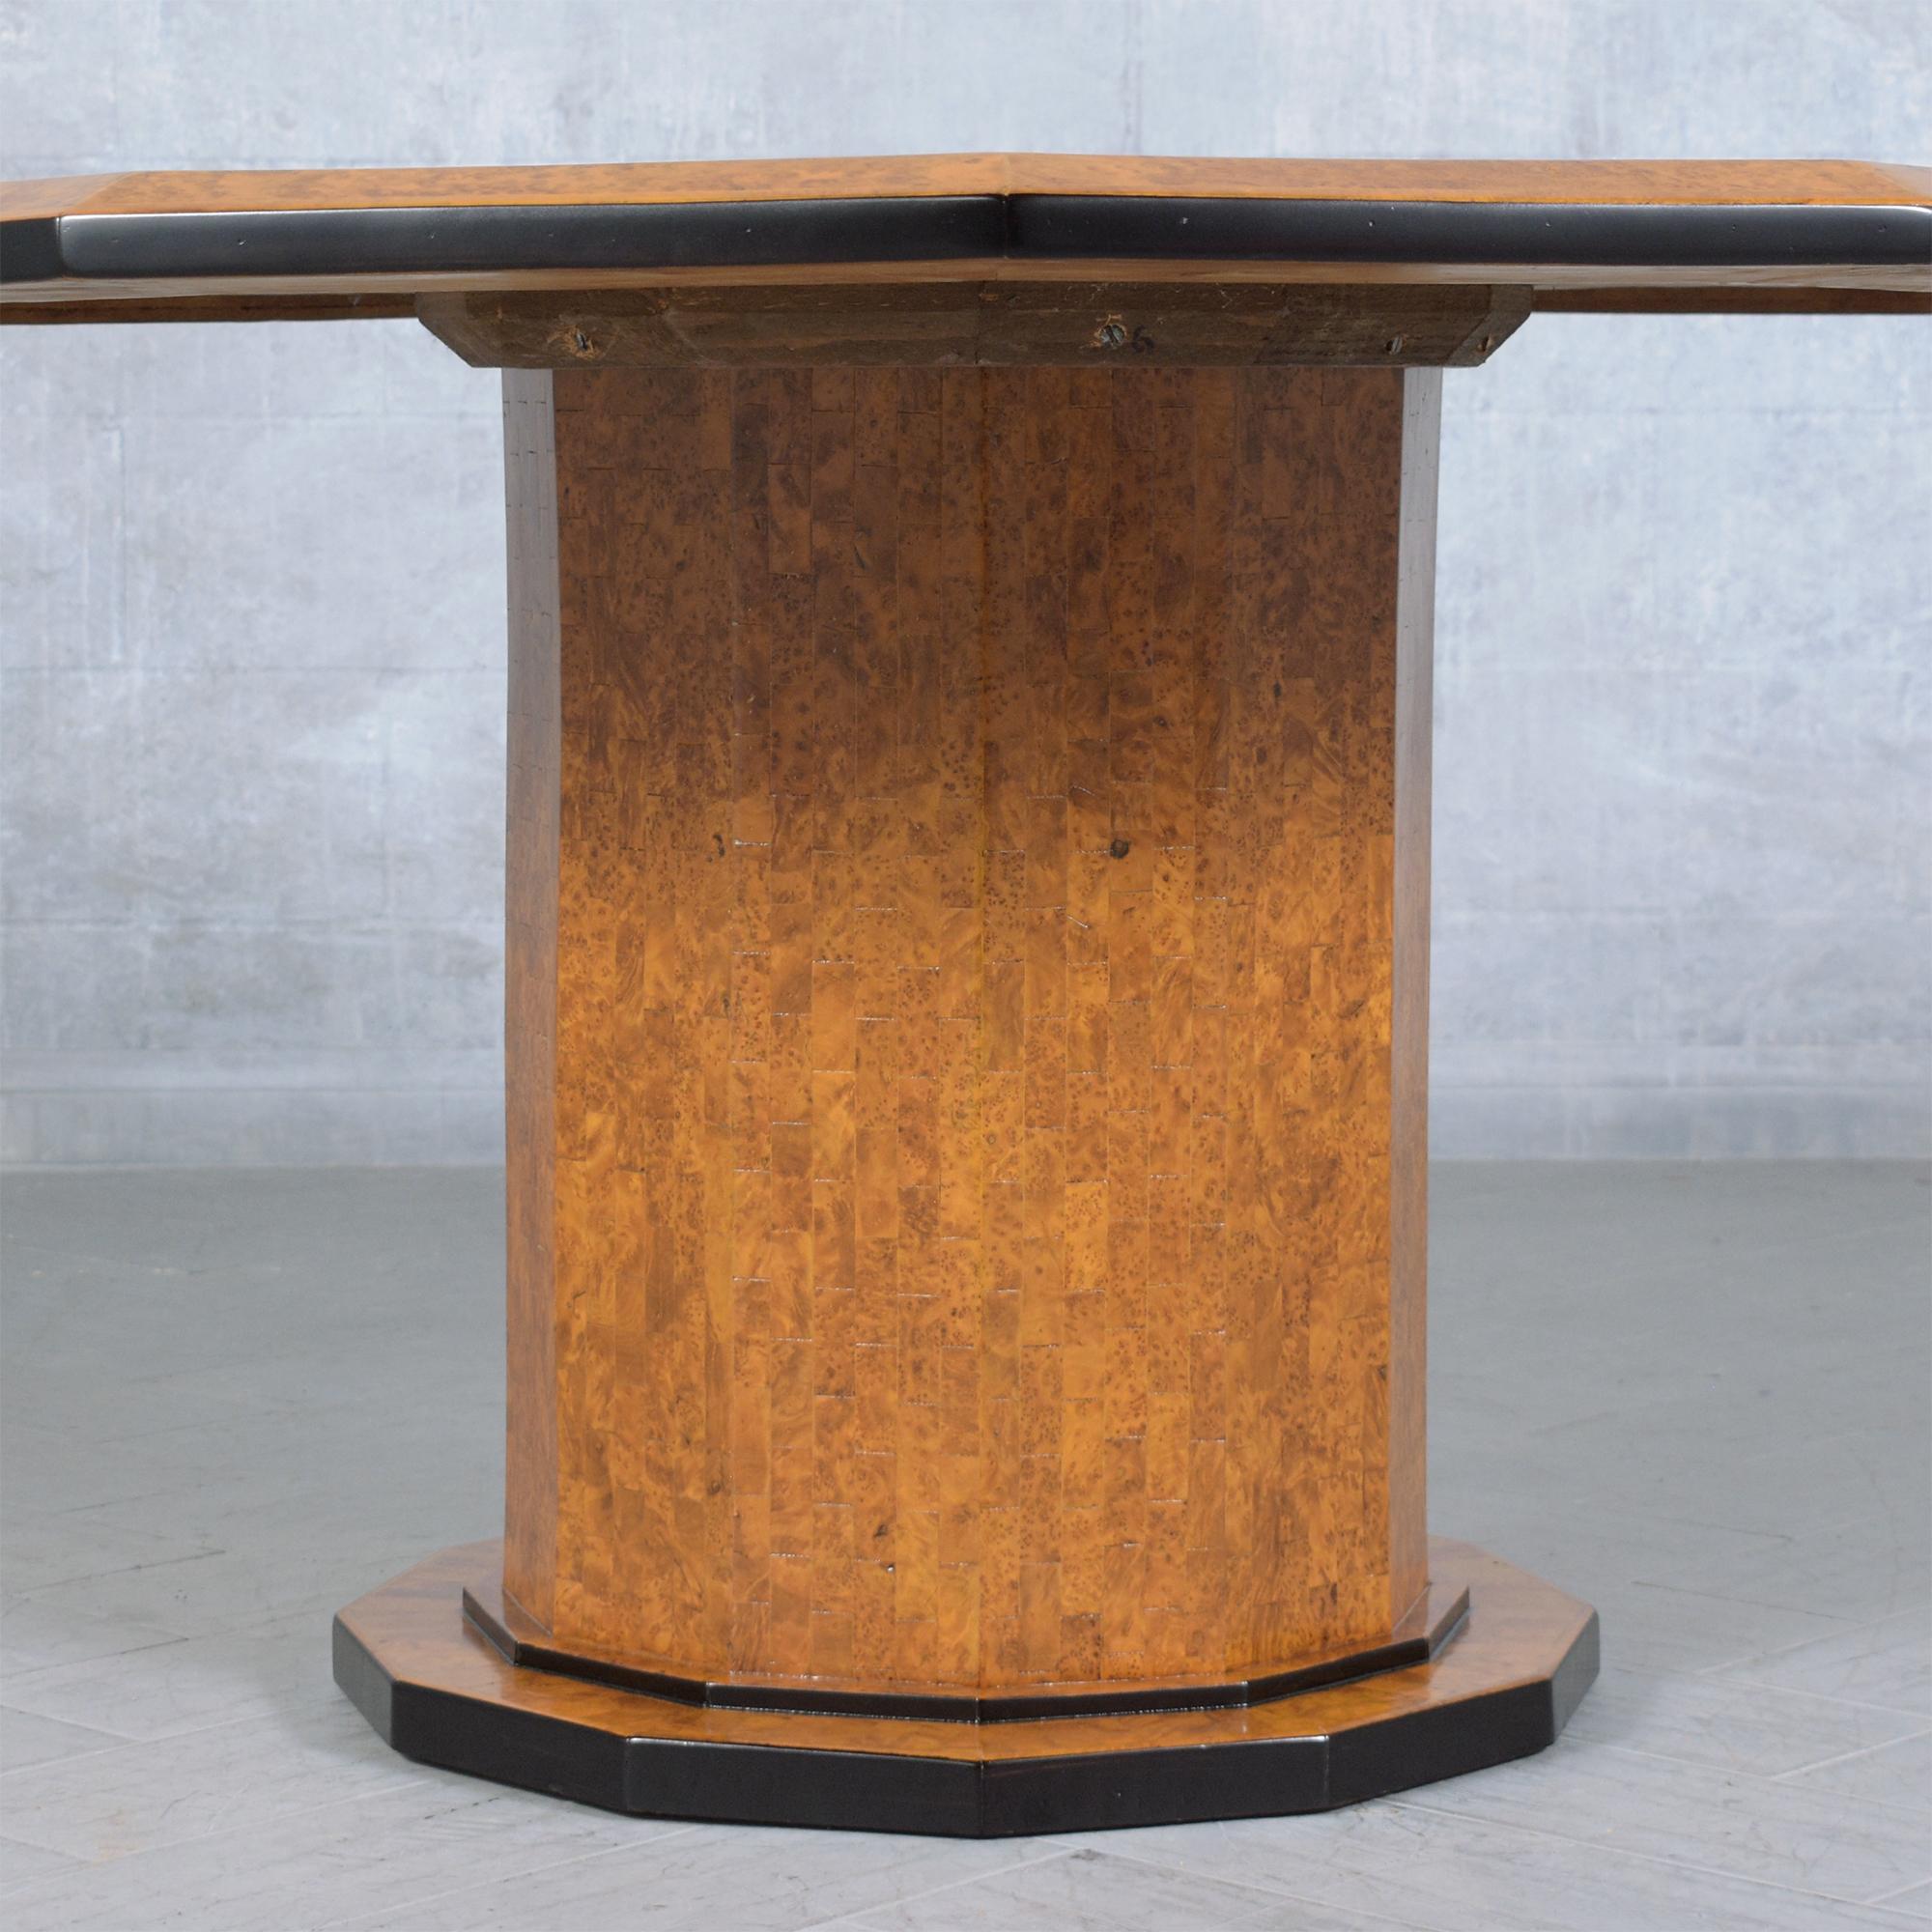 1880s Restored Walnut Veneer Center Table with Mother-of-Pearl Inlays For Sale 2